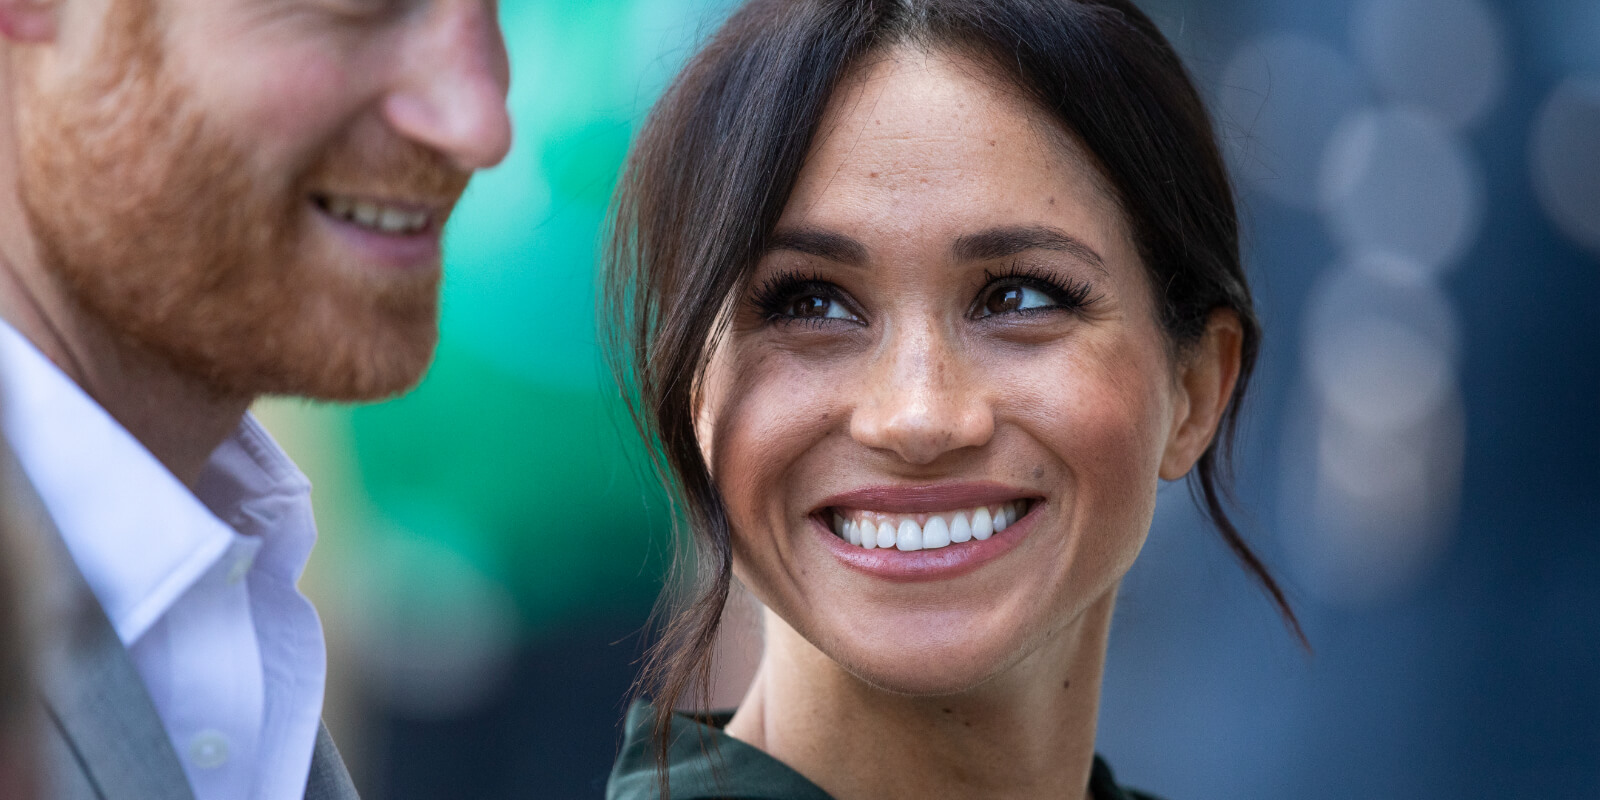 Prince Harry and Meghan Markle in a candid moment in 2018.